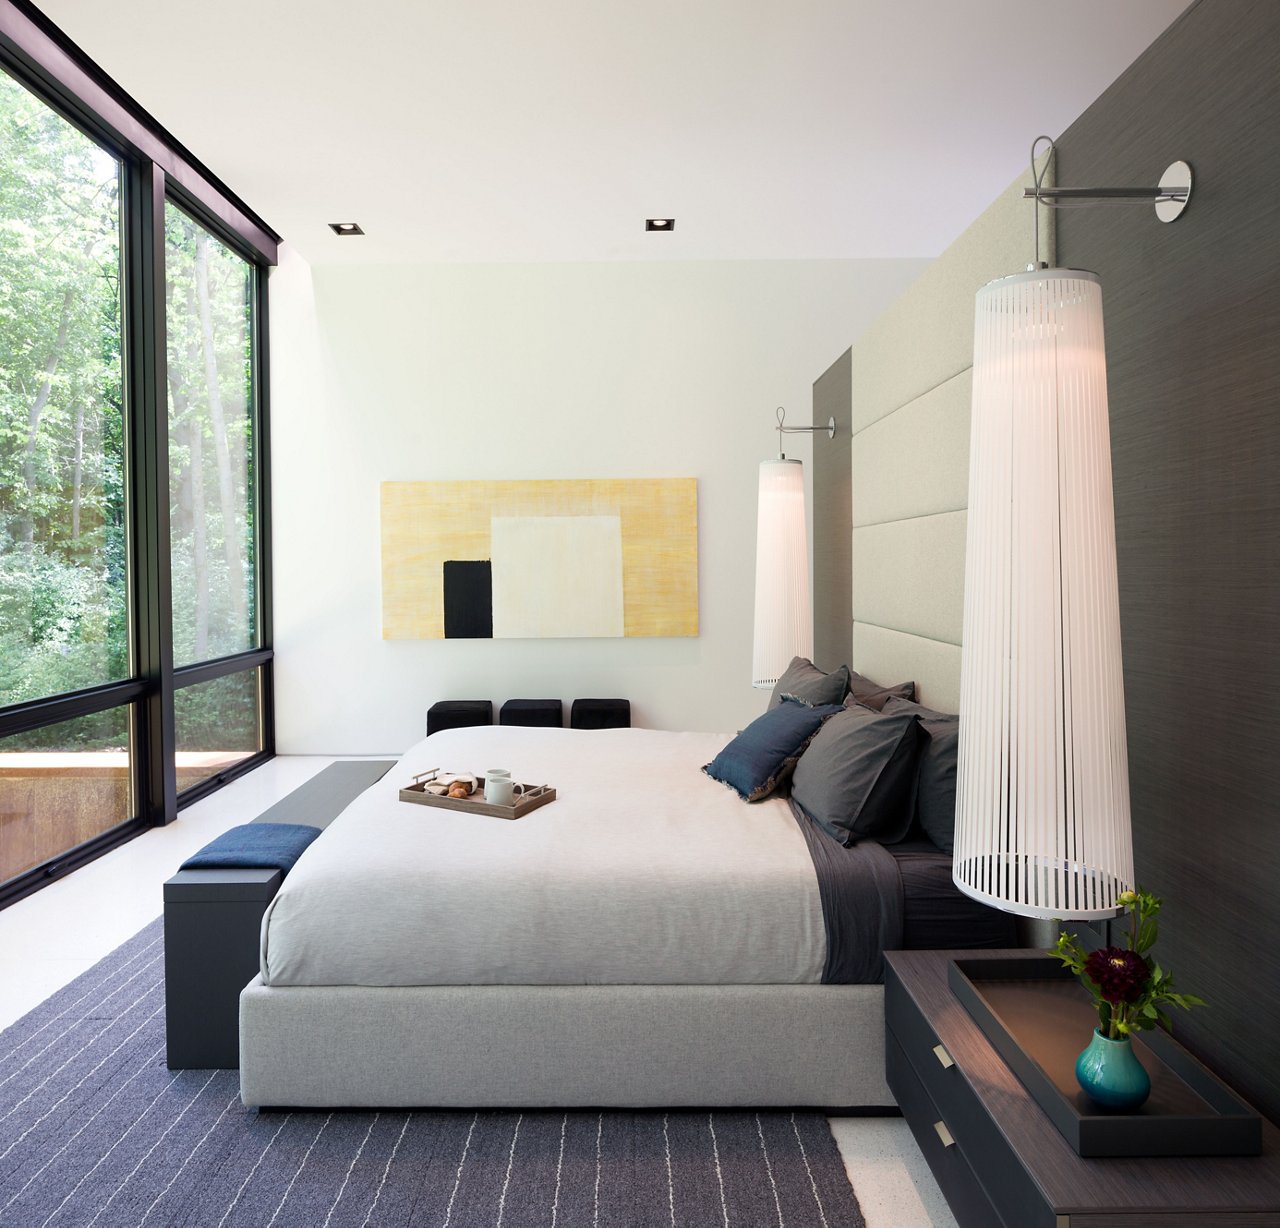 A master bedroom with a full wall of windows, and elegant wall lighting.